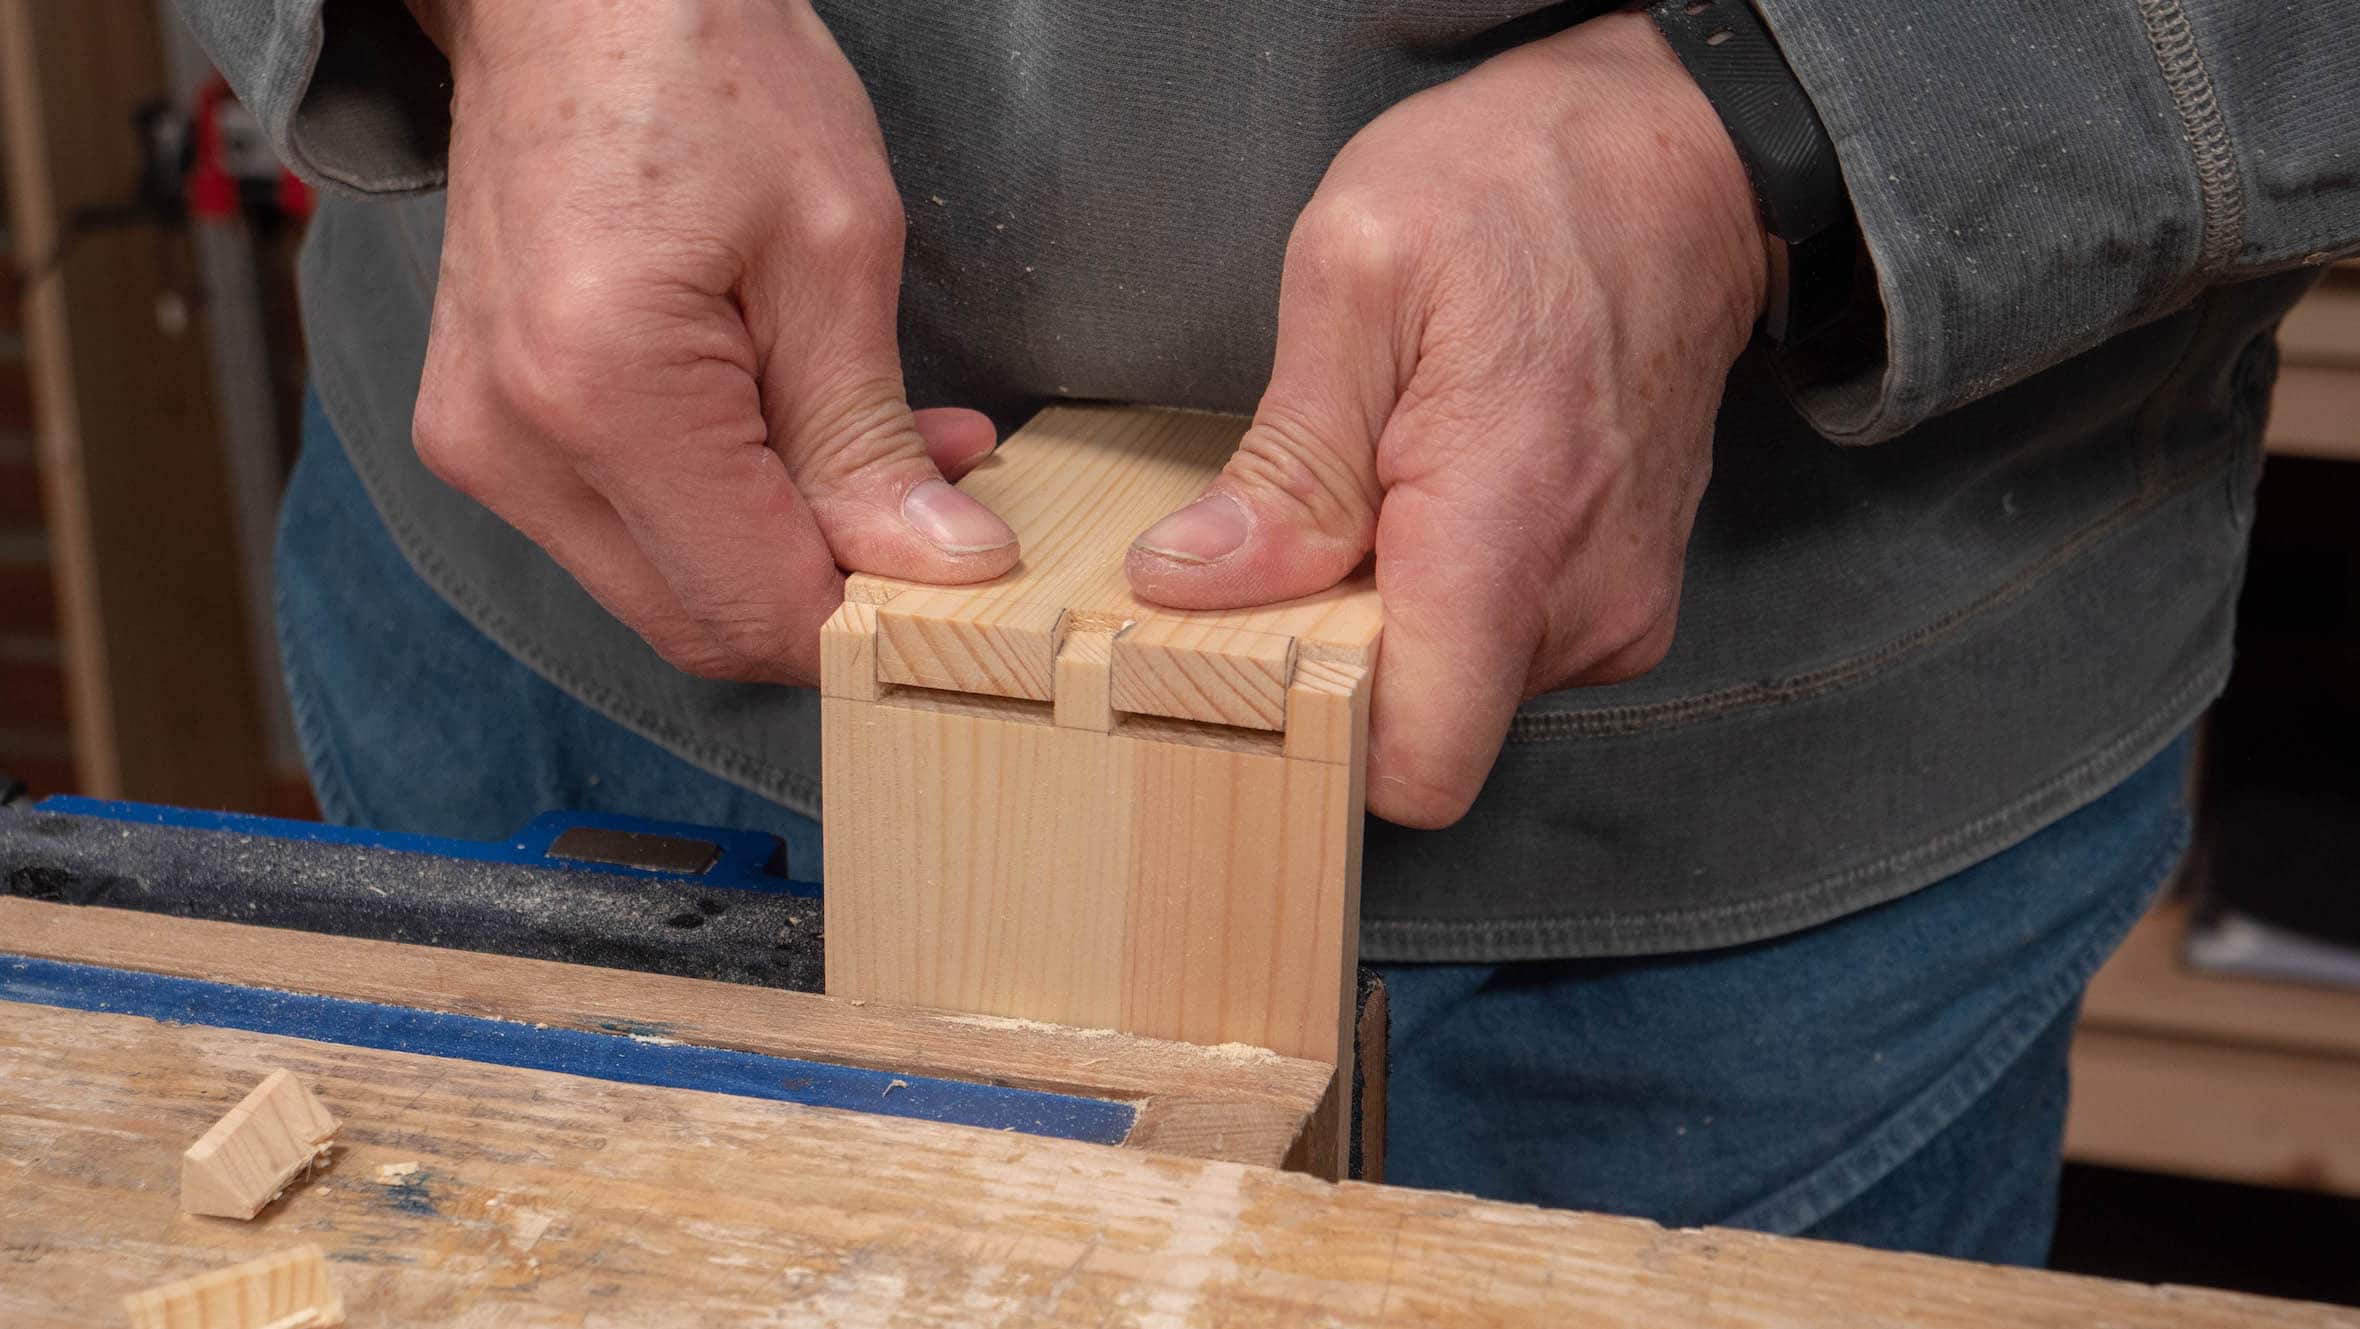 Can You Pass This Woodworking Quiz?